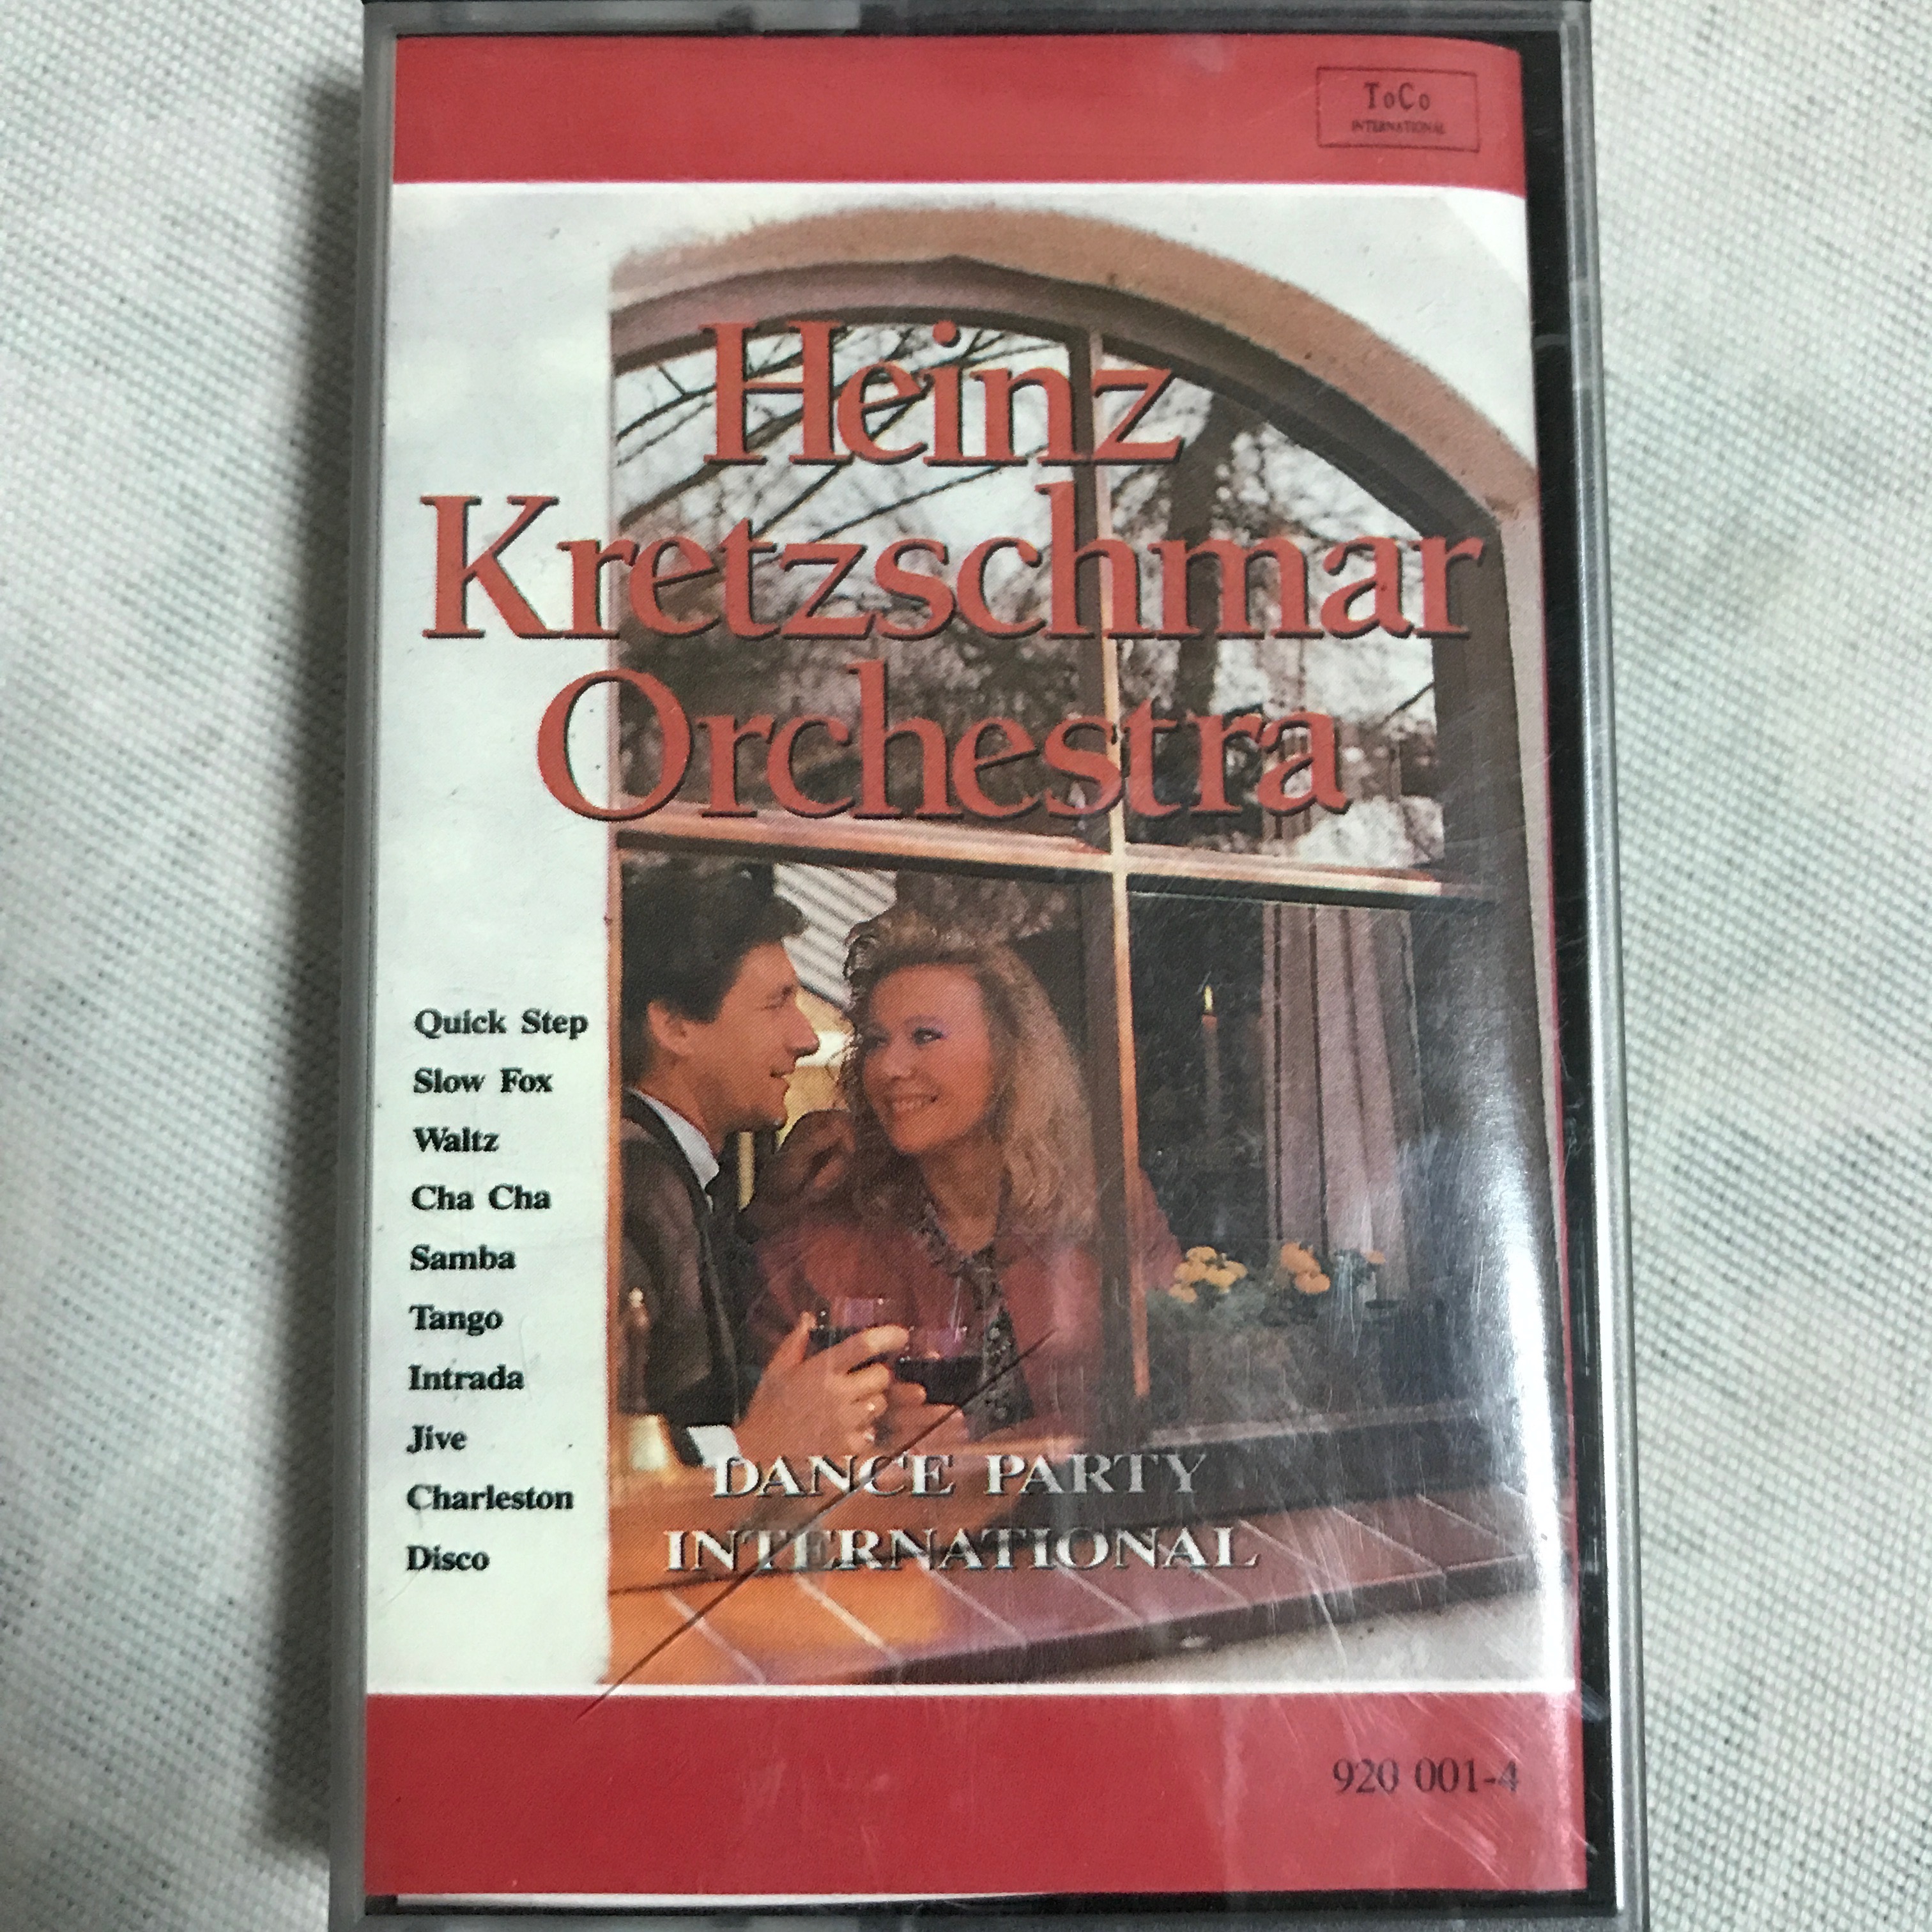 Heinz Kretzschmar Dance Party in the picture Import Poly Gold Records cassette tape